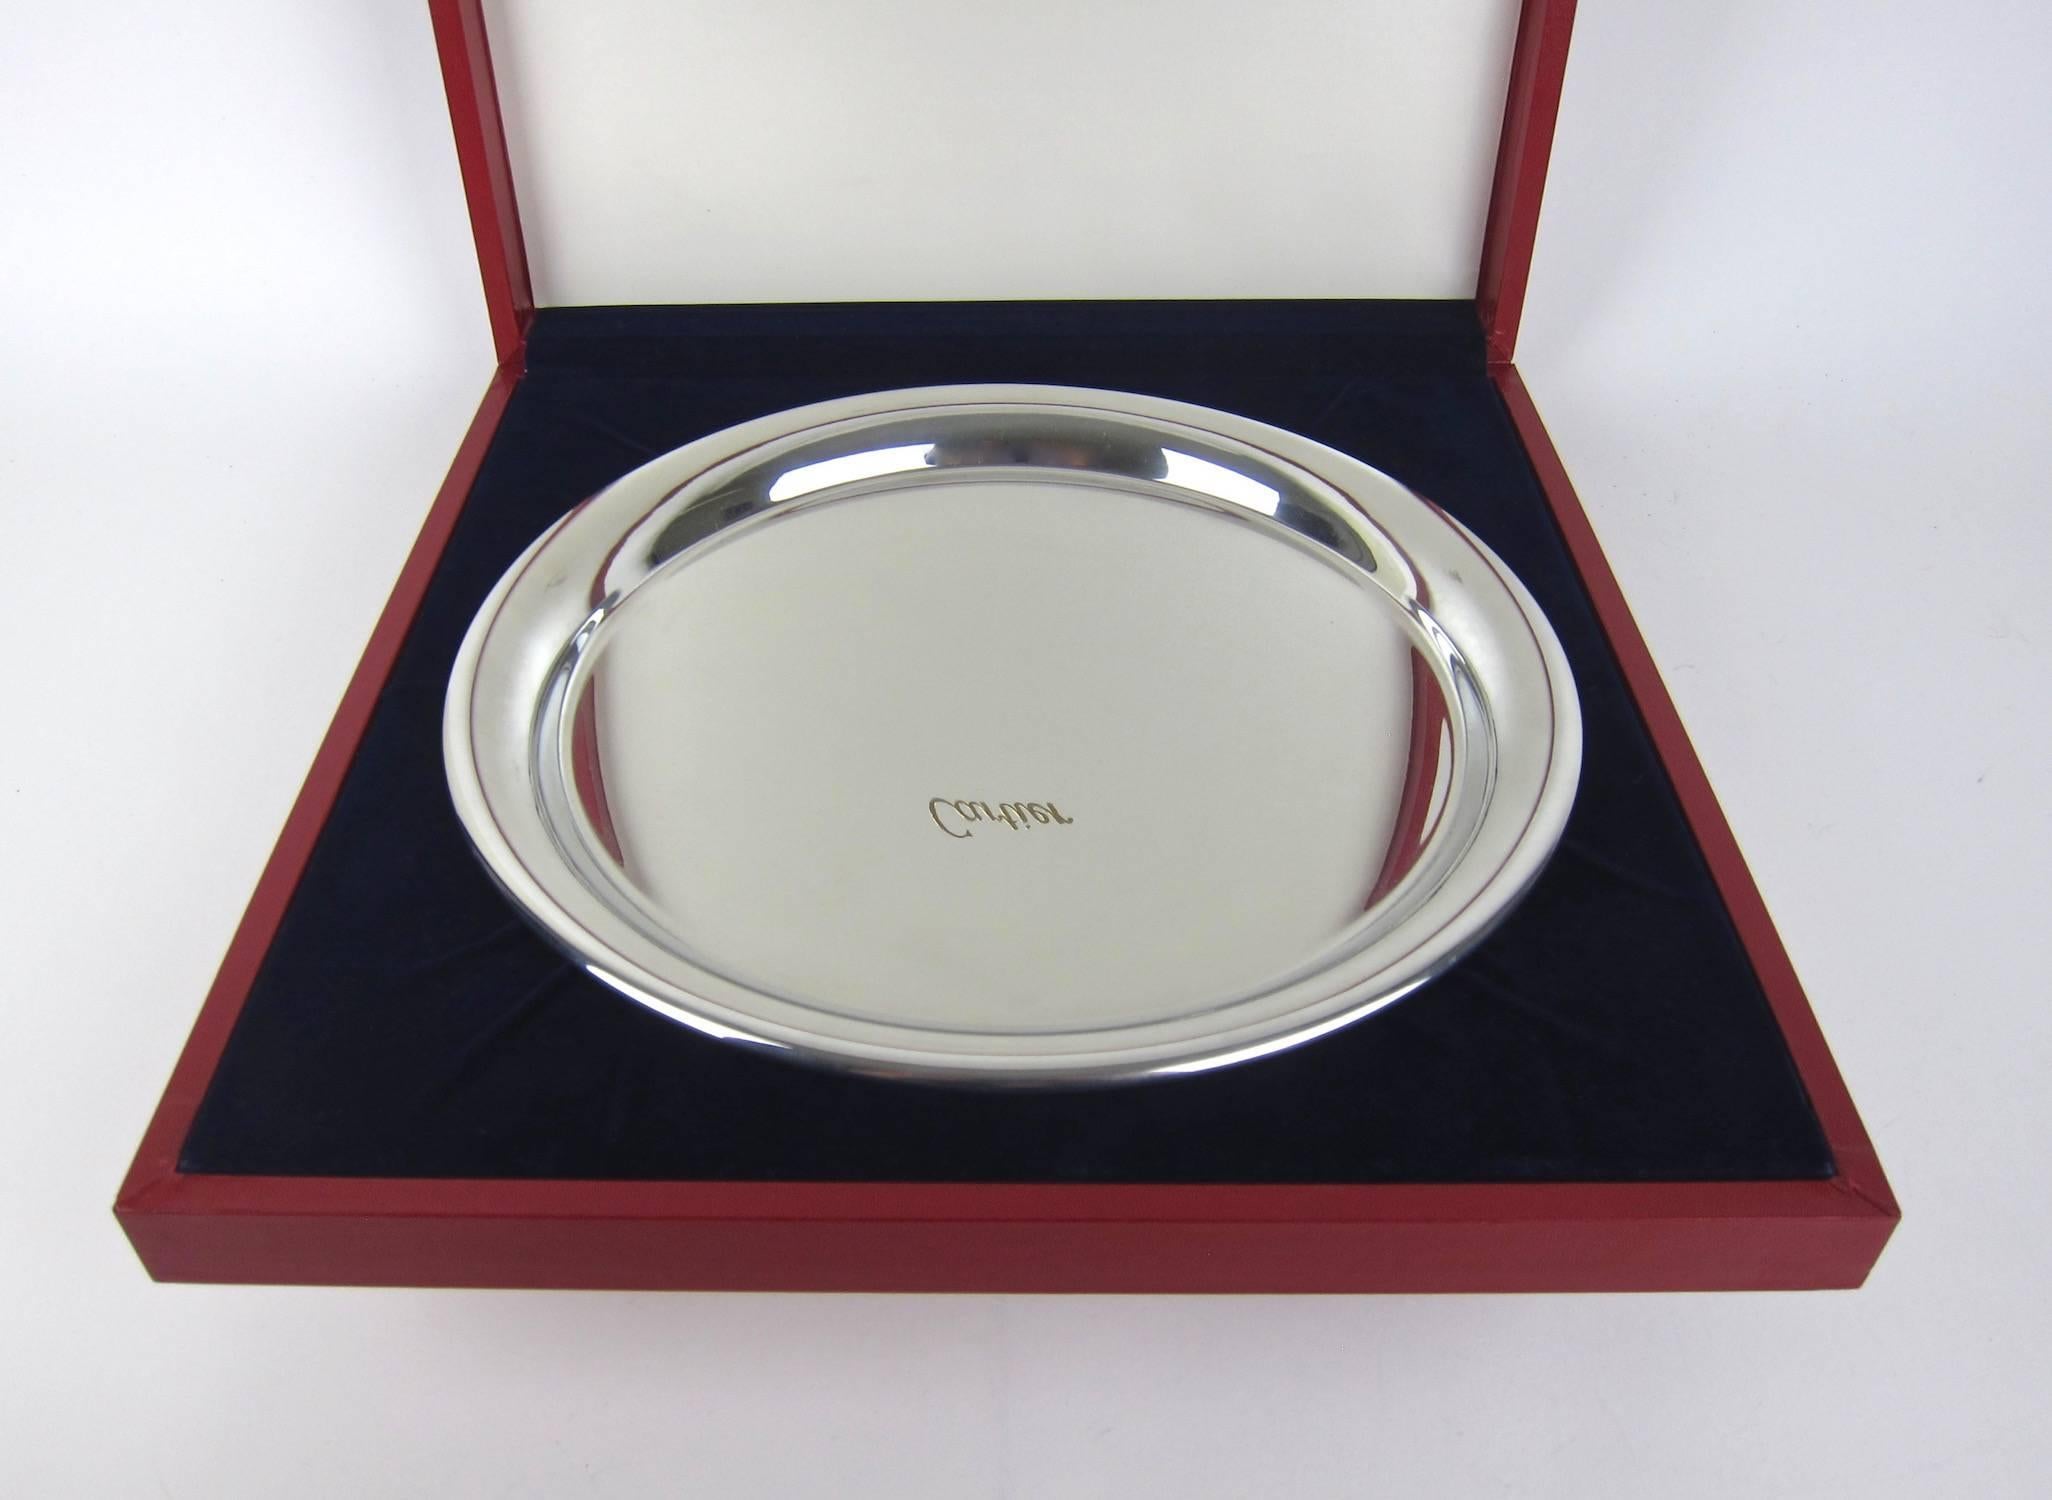 An elegant vintage serving tray from Cartier, perfect for cocktails or cupcakes, in highly polished pewter. Made in France, circa 1977. The round tray has a modern, Minimalist design with a wire-wrapped rim, stamped 